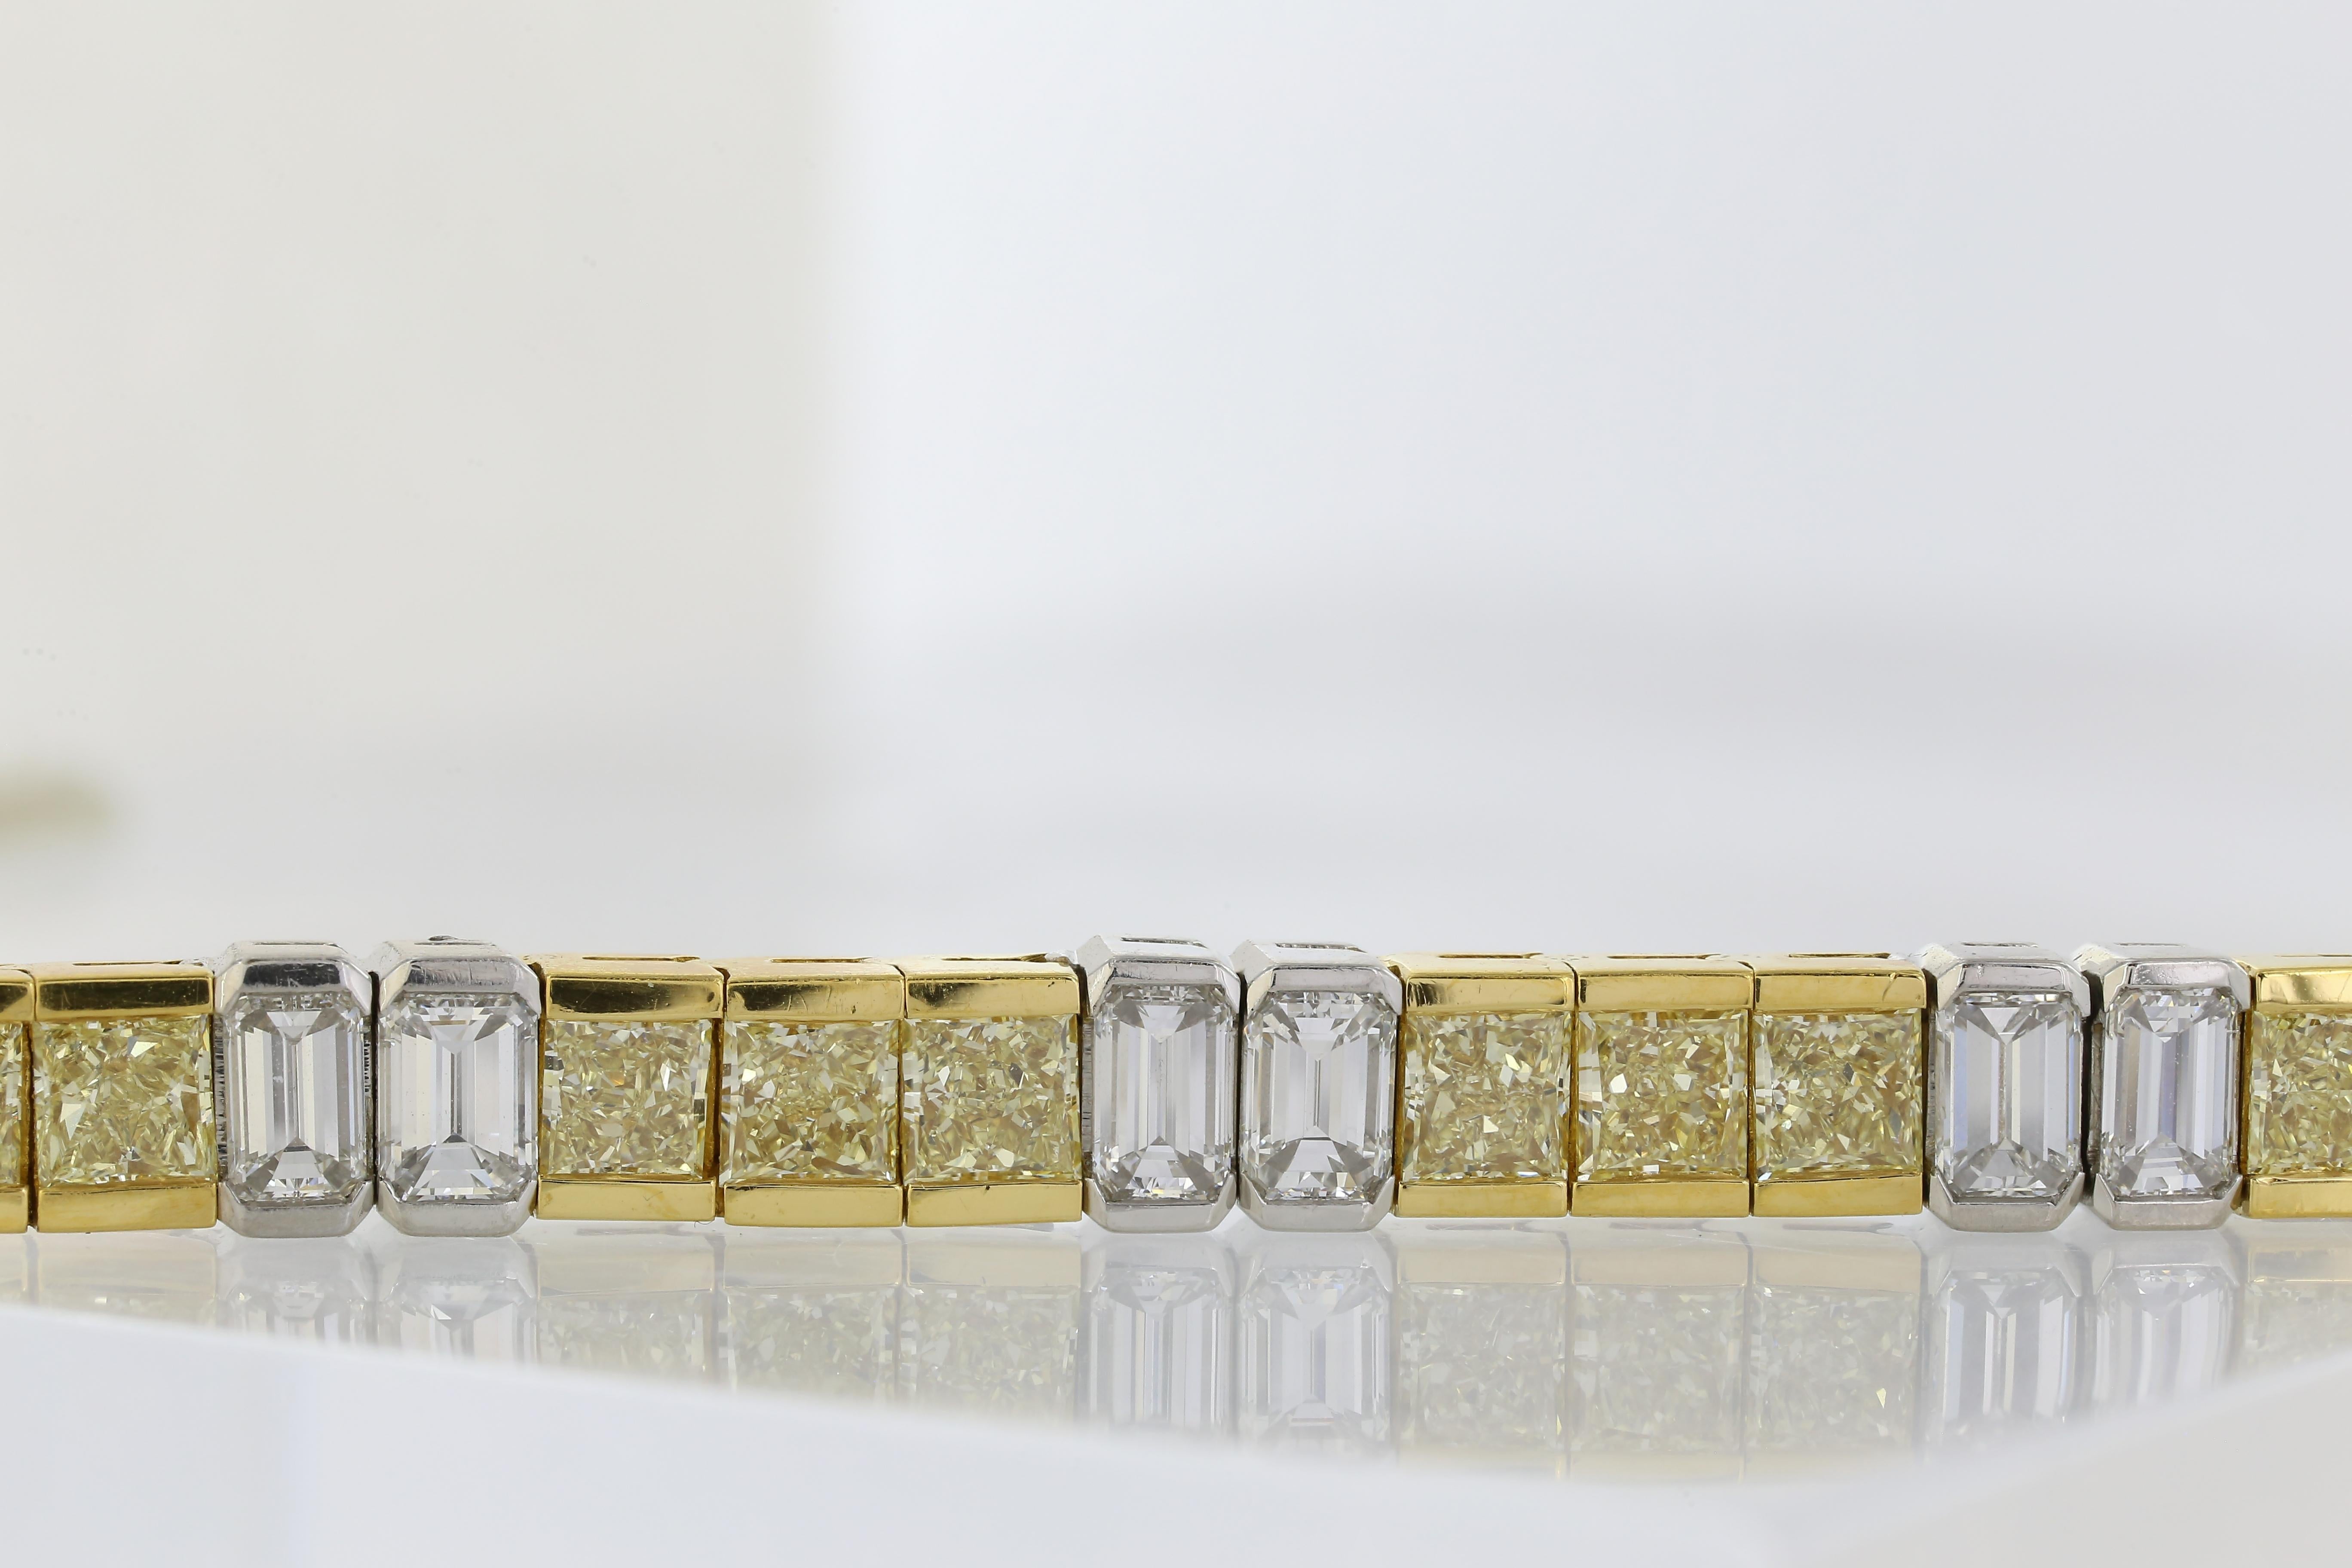 Two-Tone 13.00 Carat Fancy Intense Yellow Radiant Cut Diamond Bracelet In Excellent Condition For Sale In Chestnut Hill, MA